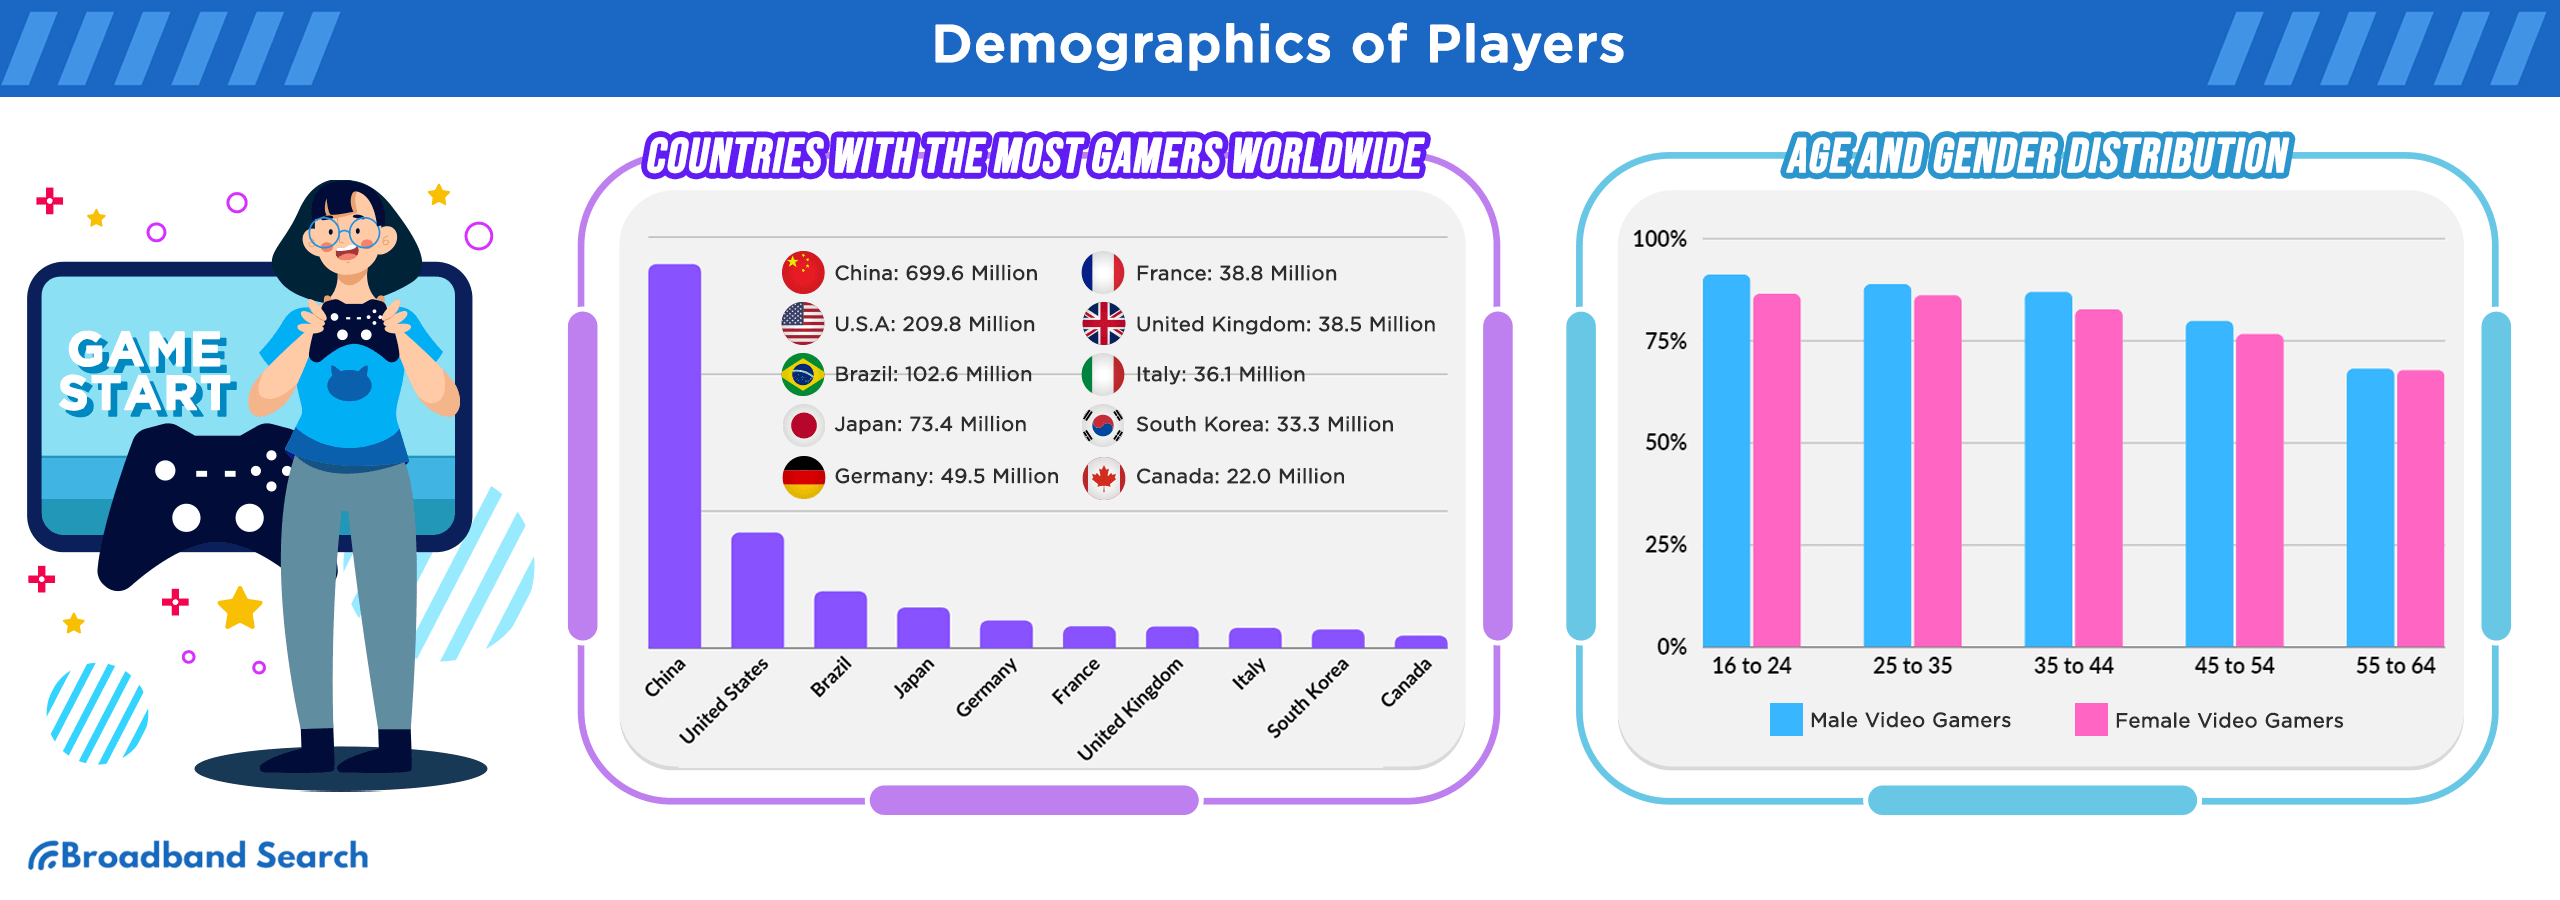 list of Countries with the most gamers worldwide and demographics of players on age and gender distribution